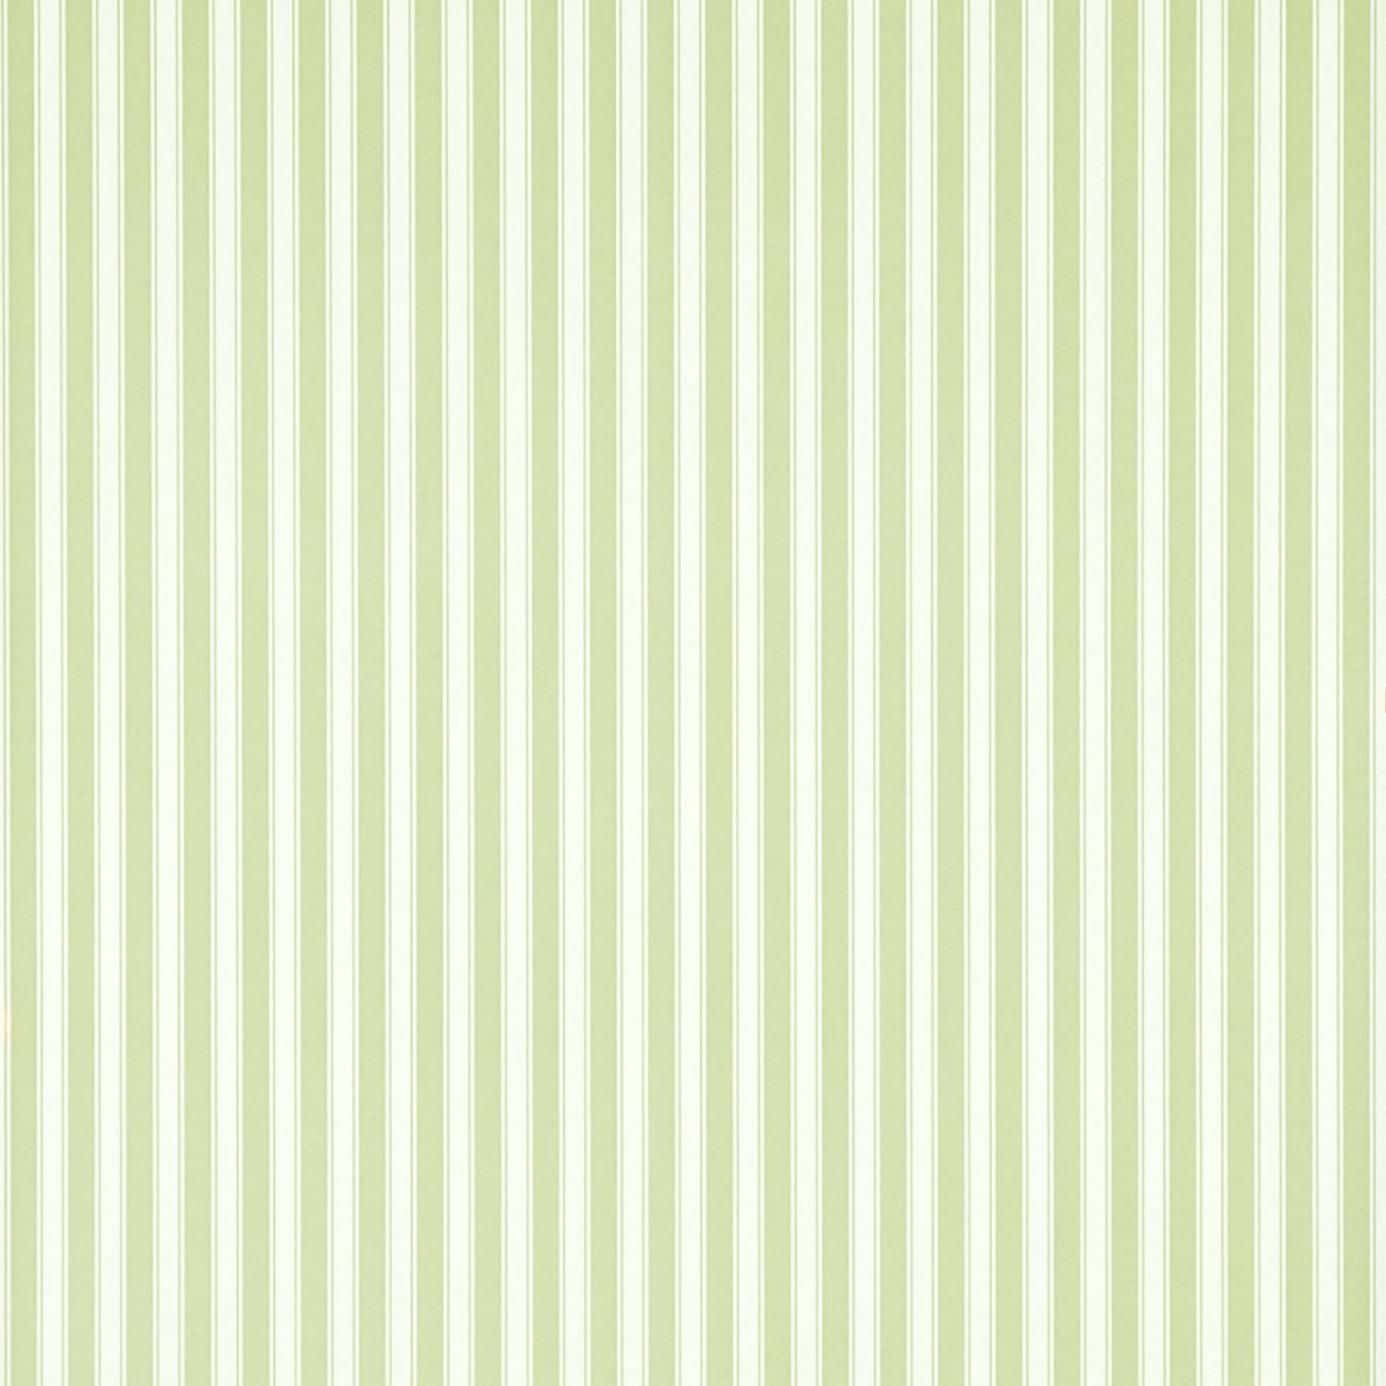 A Green And White Striped Wallpaper